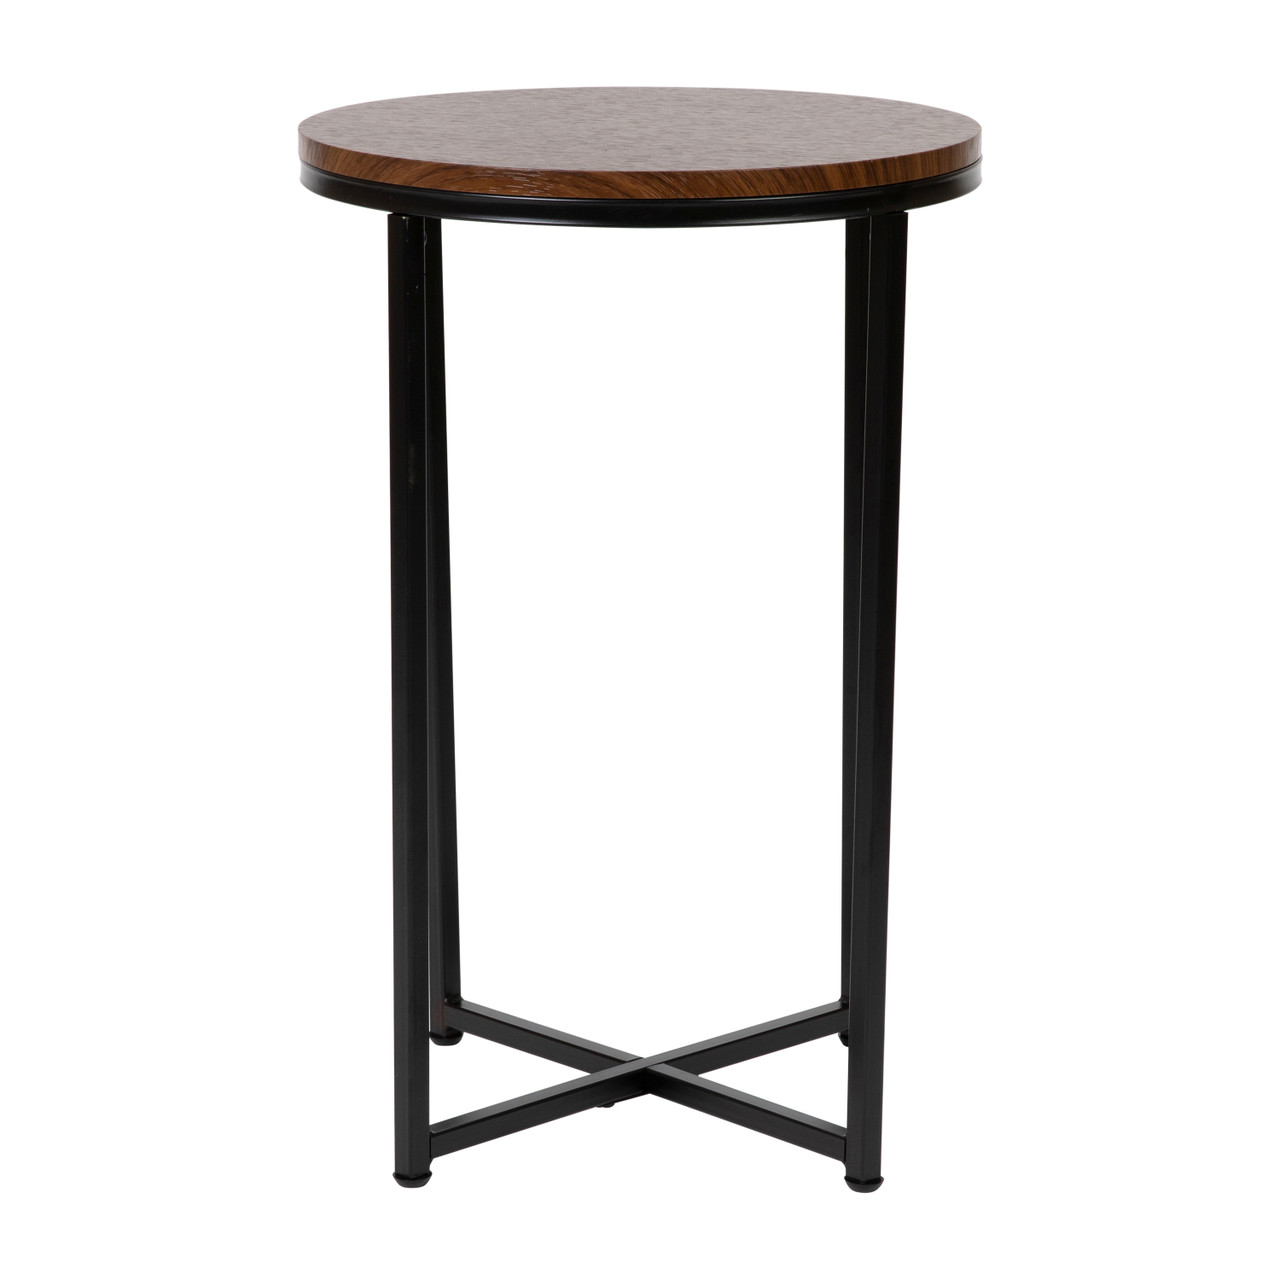 Flash Furniture Hampstead Collection End Table Modern Walnut Finish Accent Table with Crisscross Matte Black Frame, Model# NAN-JH-1787ET-WAL-BK-GG